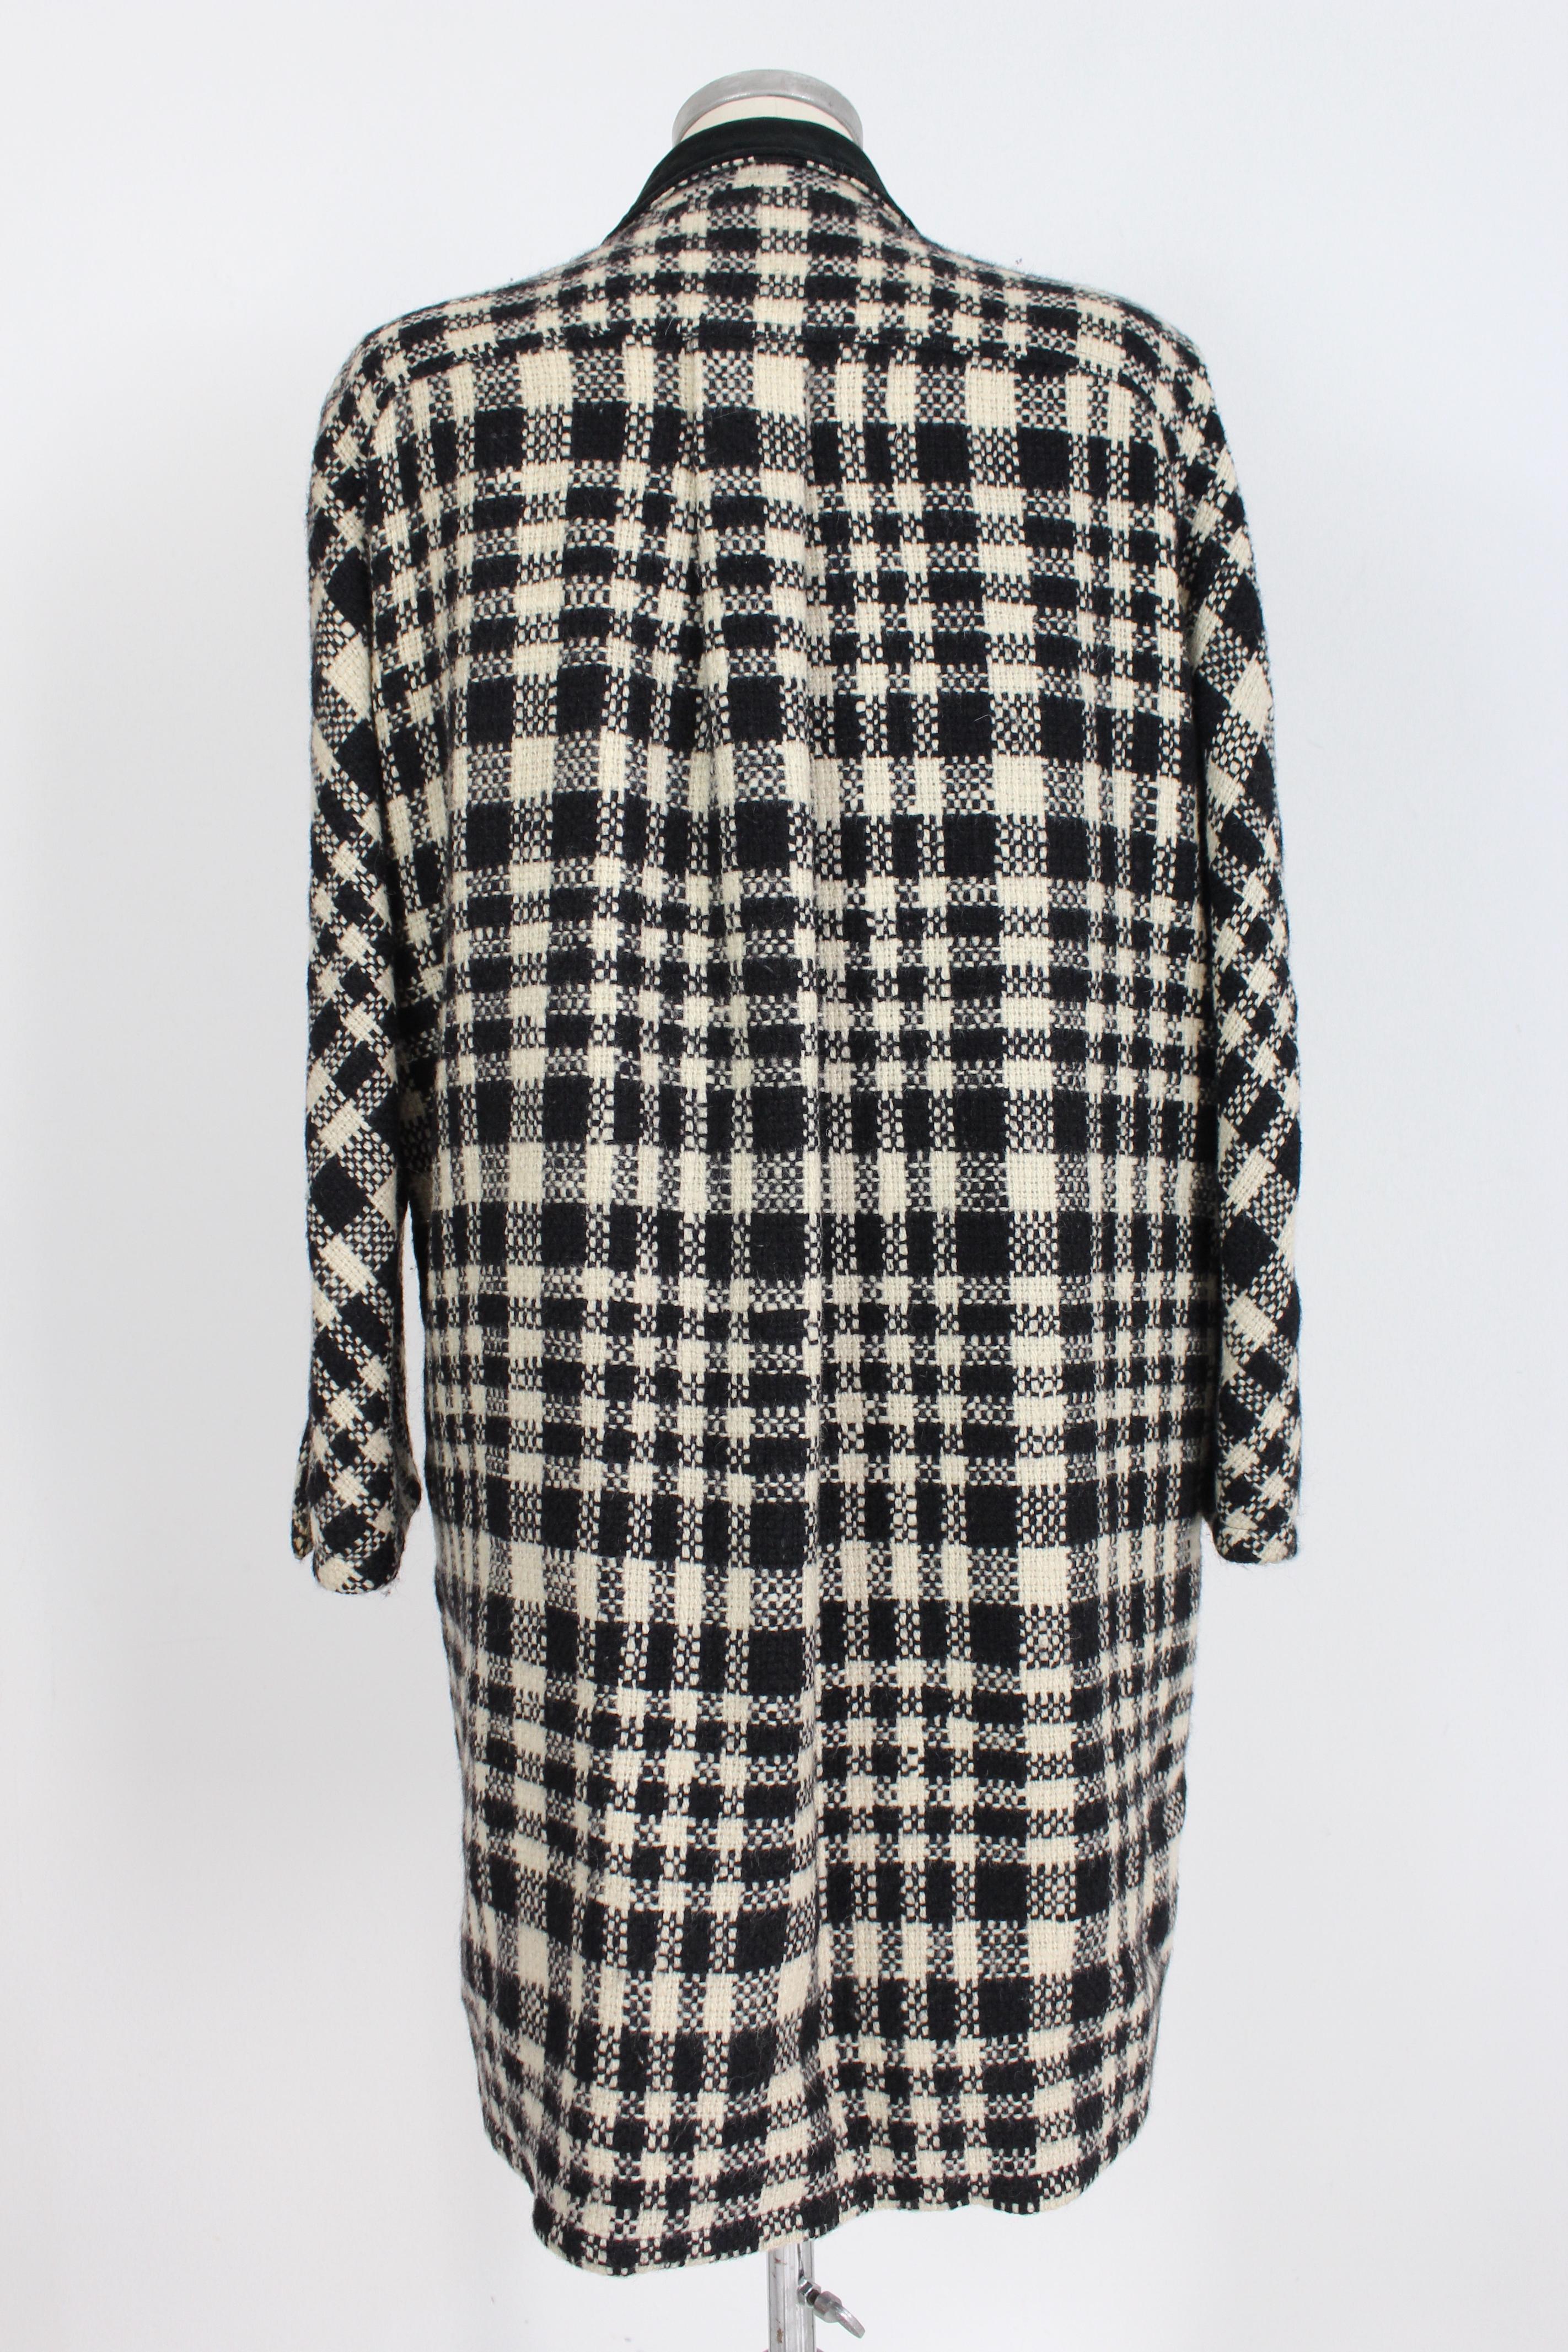 Valentino Miss V 90s vintage women's coat. Beige and black checked coat. Black velvet collar, zip closure. Fabric 80% wool, 20% mohair, internally lined. Made in Italy.

Condition: Very Good

Item in excellent condition. There are slight signs of